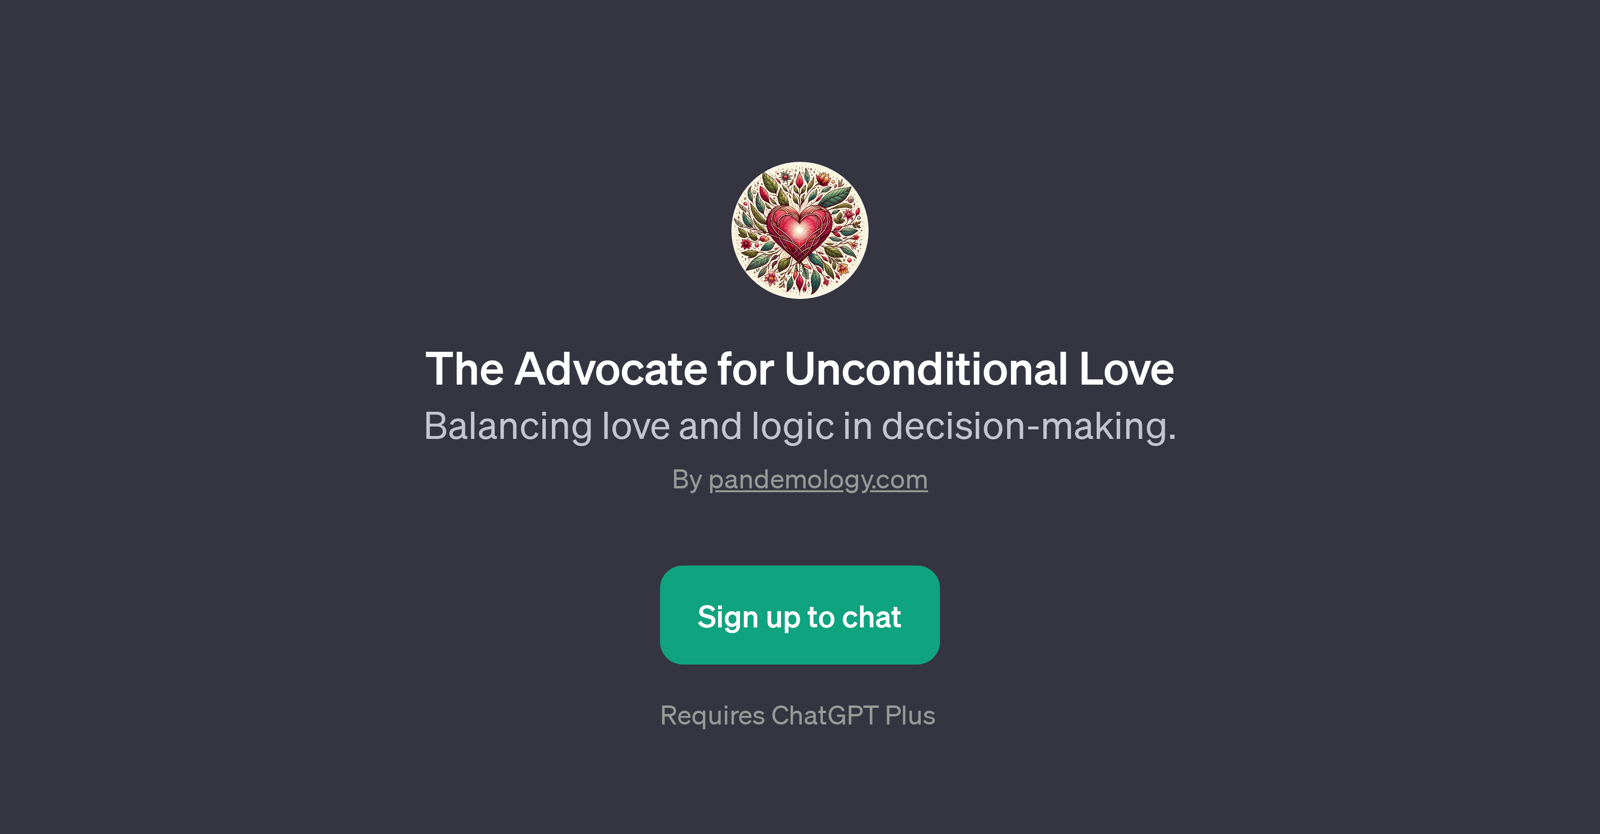 The Advocate for Unconditional Love website